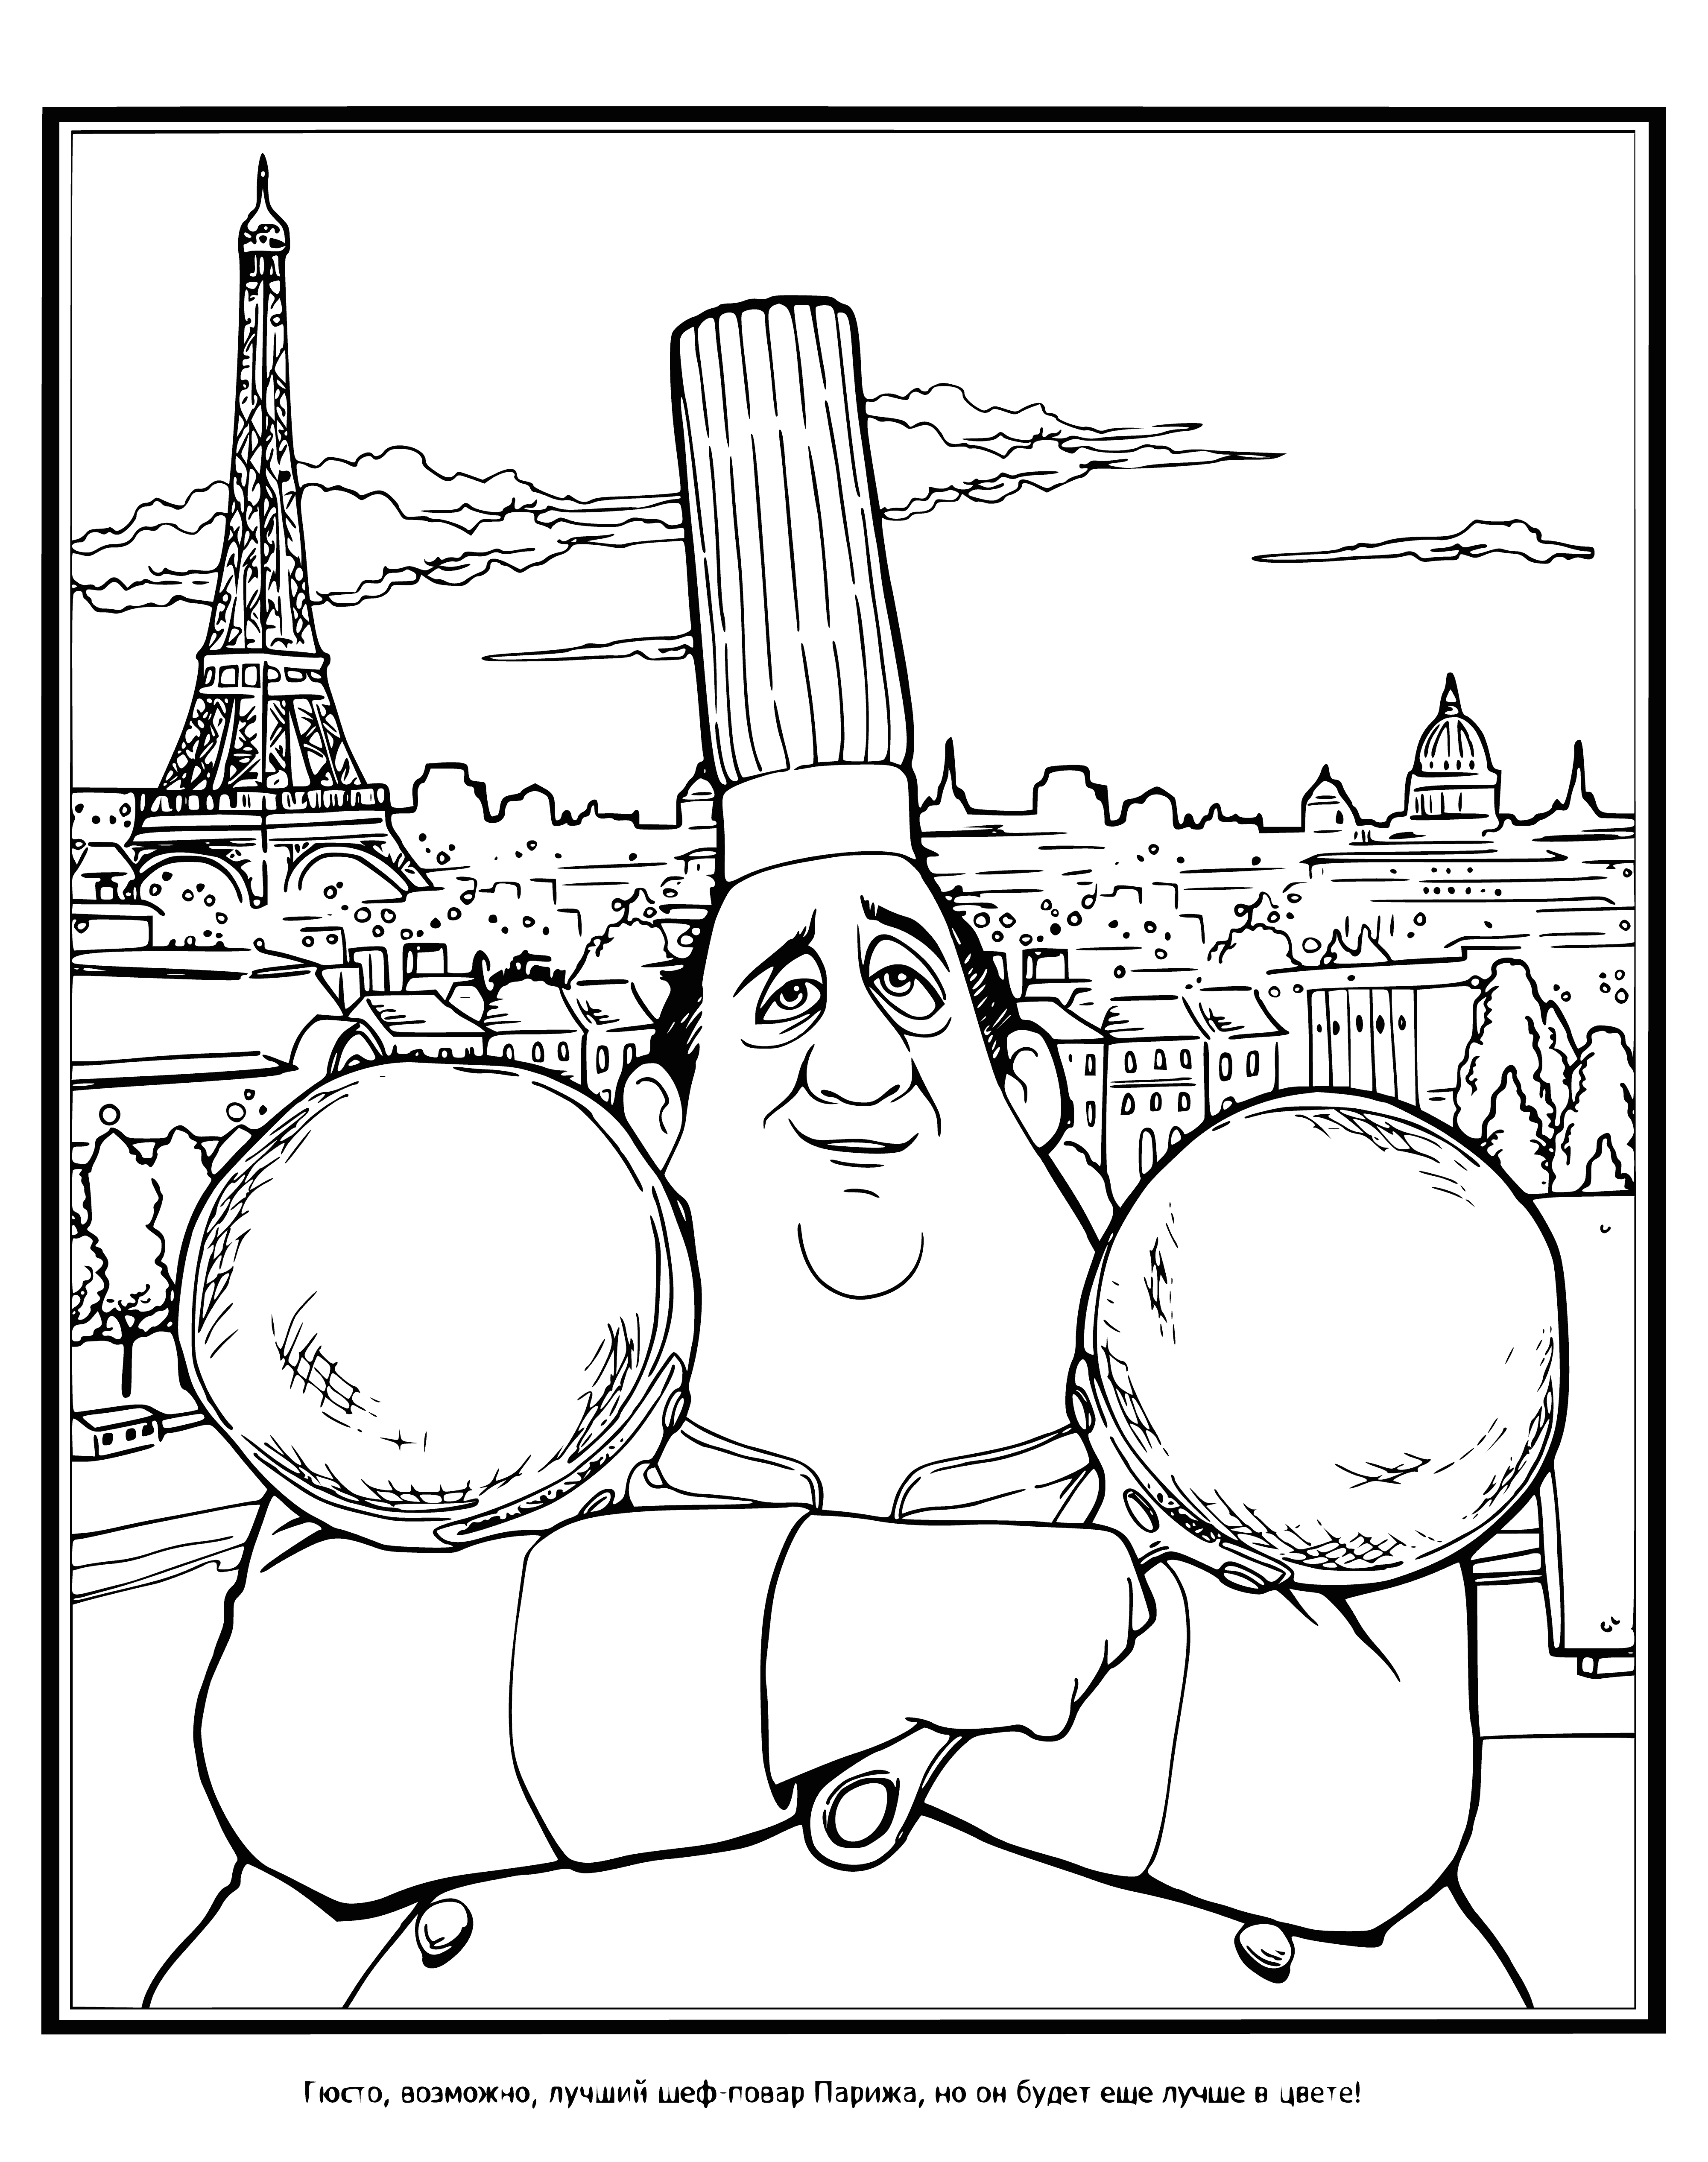 Chef Gusteau coloring page